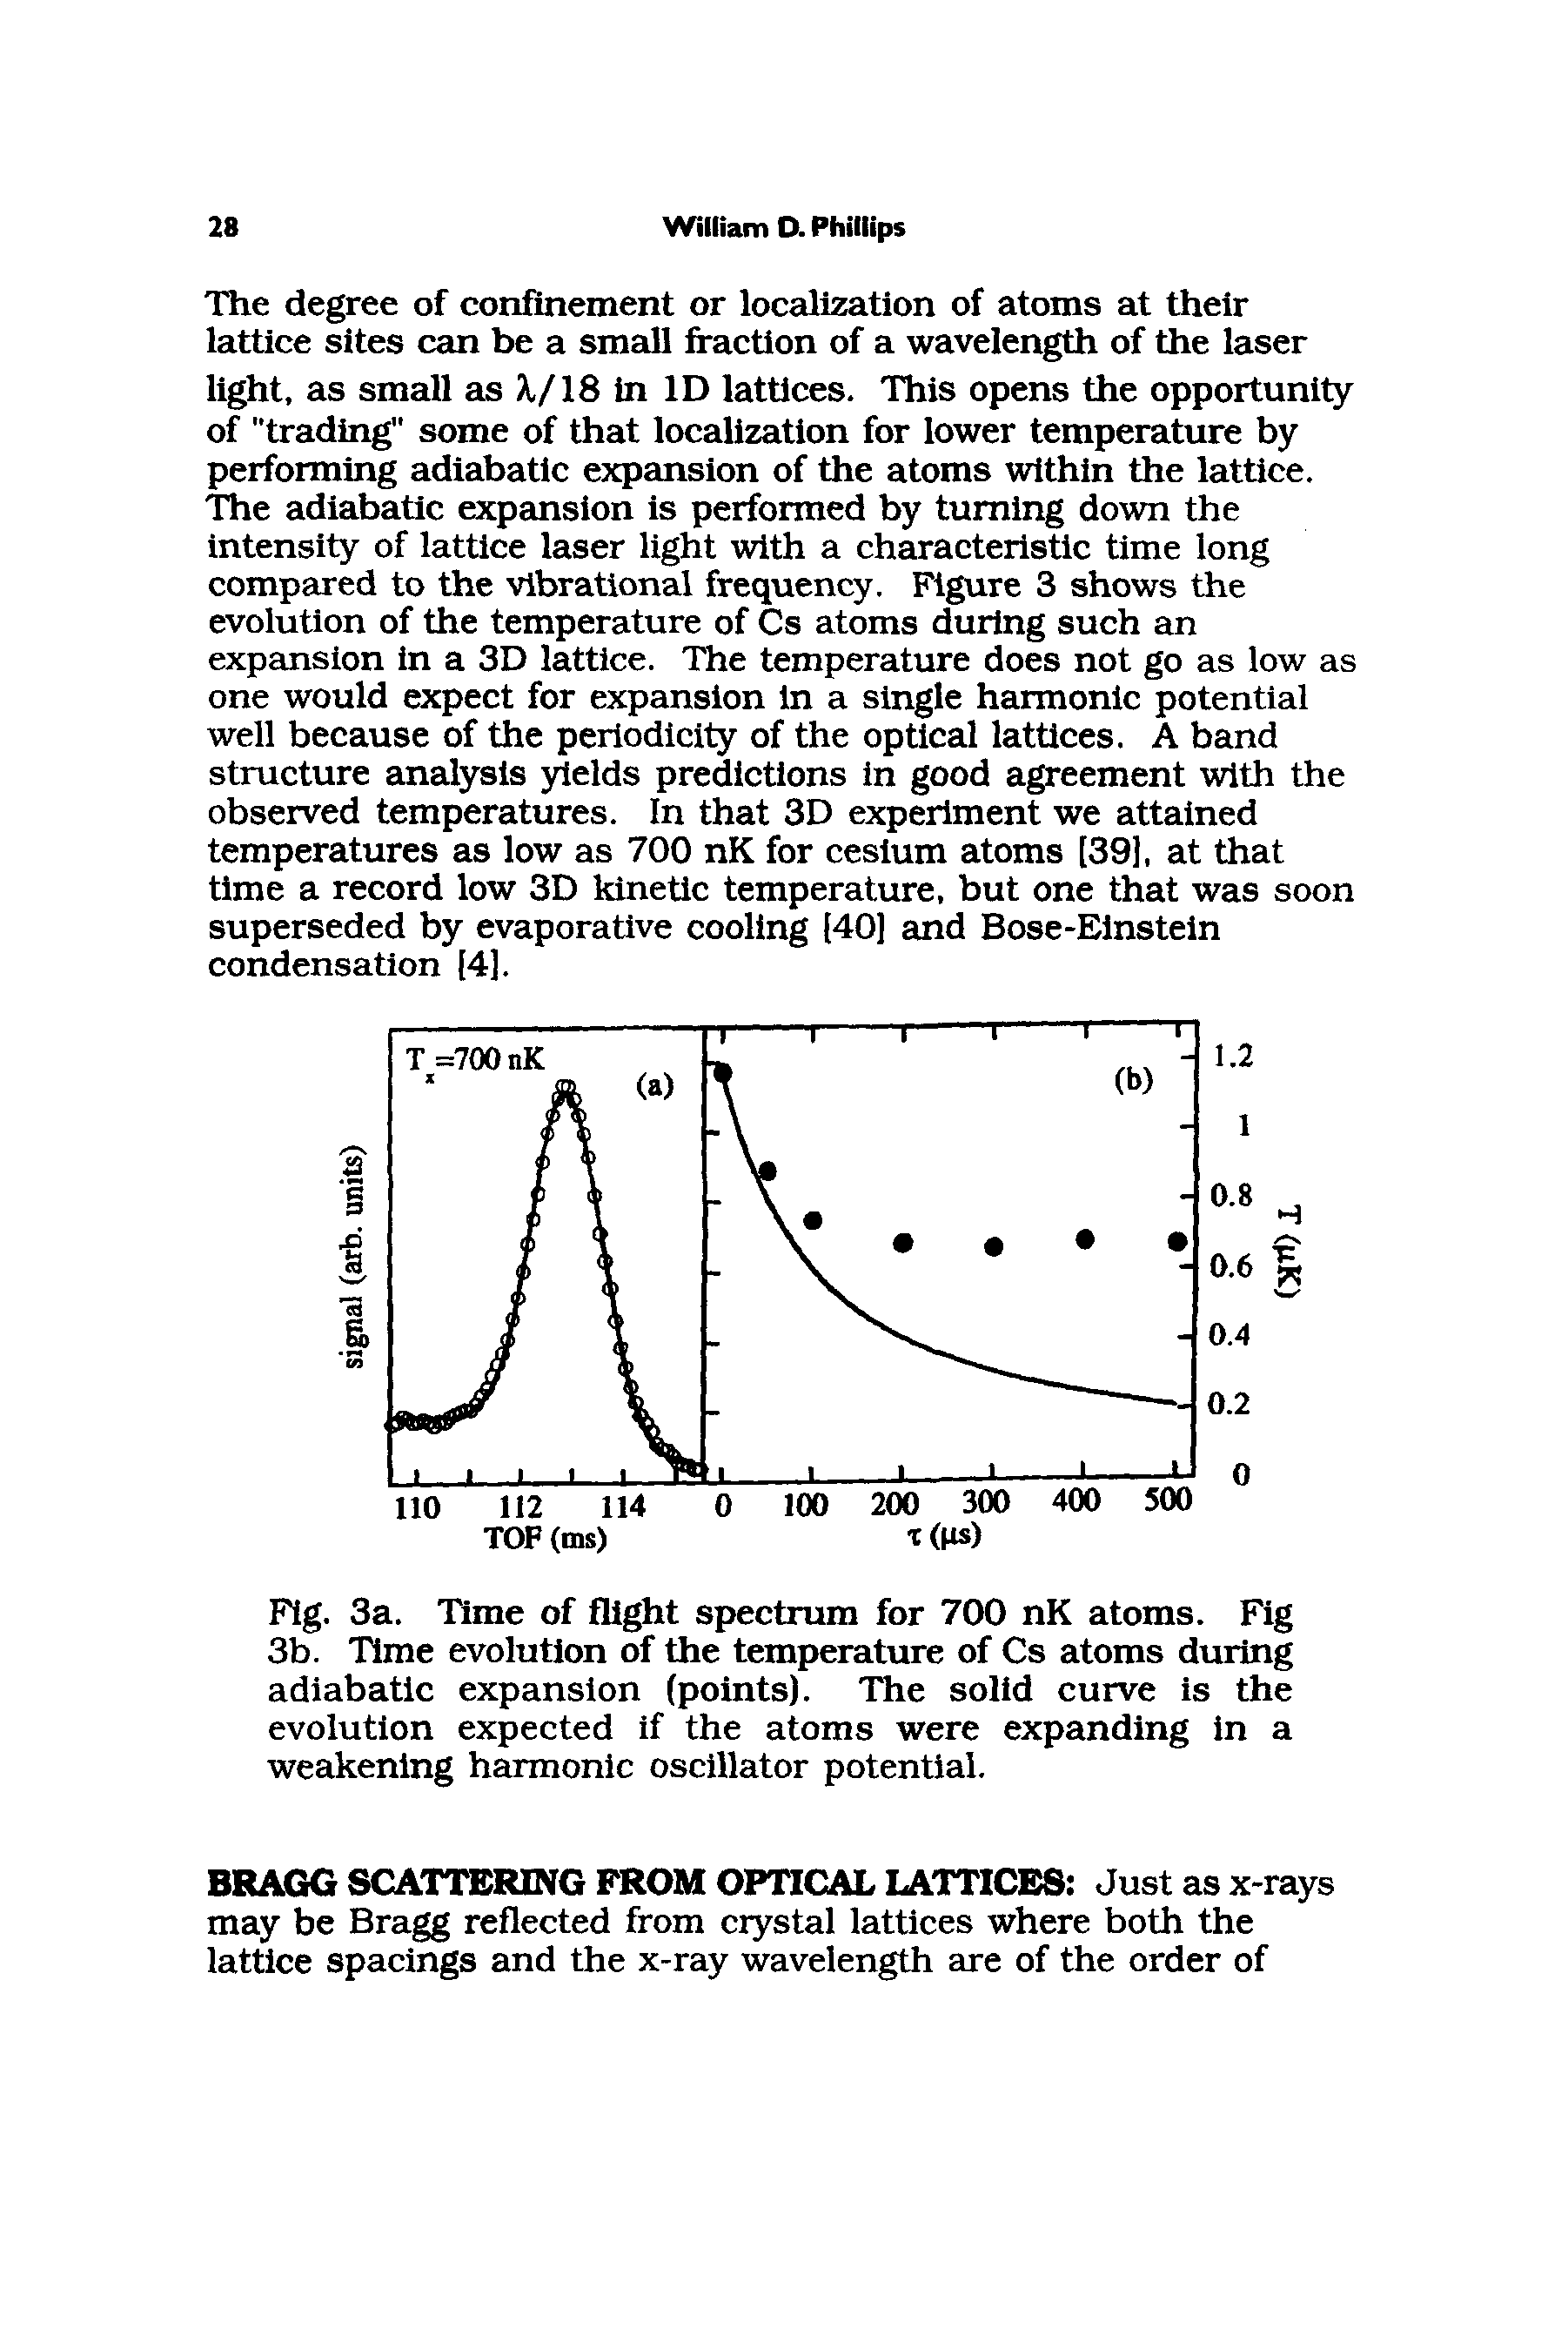 Fig. 3a. Time of flight spectrum for 700 nK atoms. Fig 3b. Time evolution of the temperature of Cs atoms during adiabatic expansion (points). The solid curve is the evolution expected if the atoms were expanding in a weakening harmonic oscillator potential.